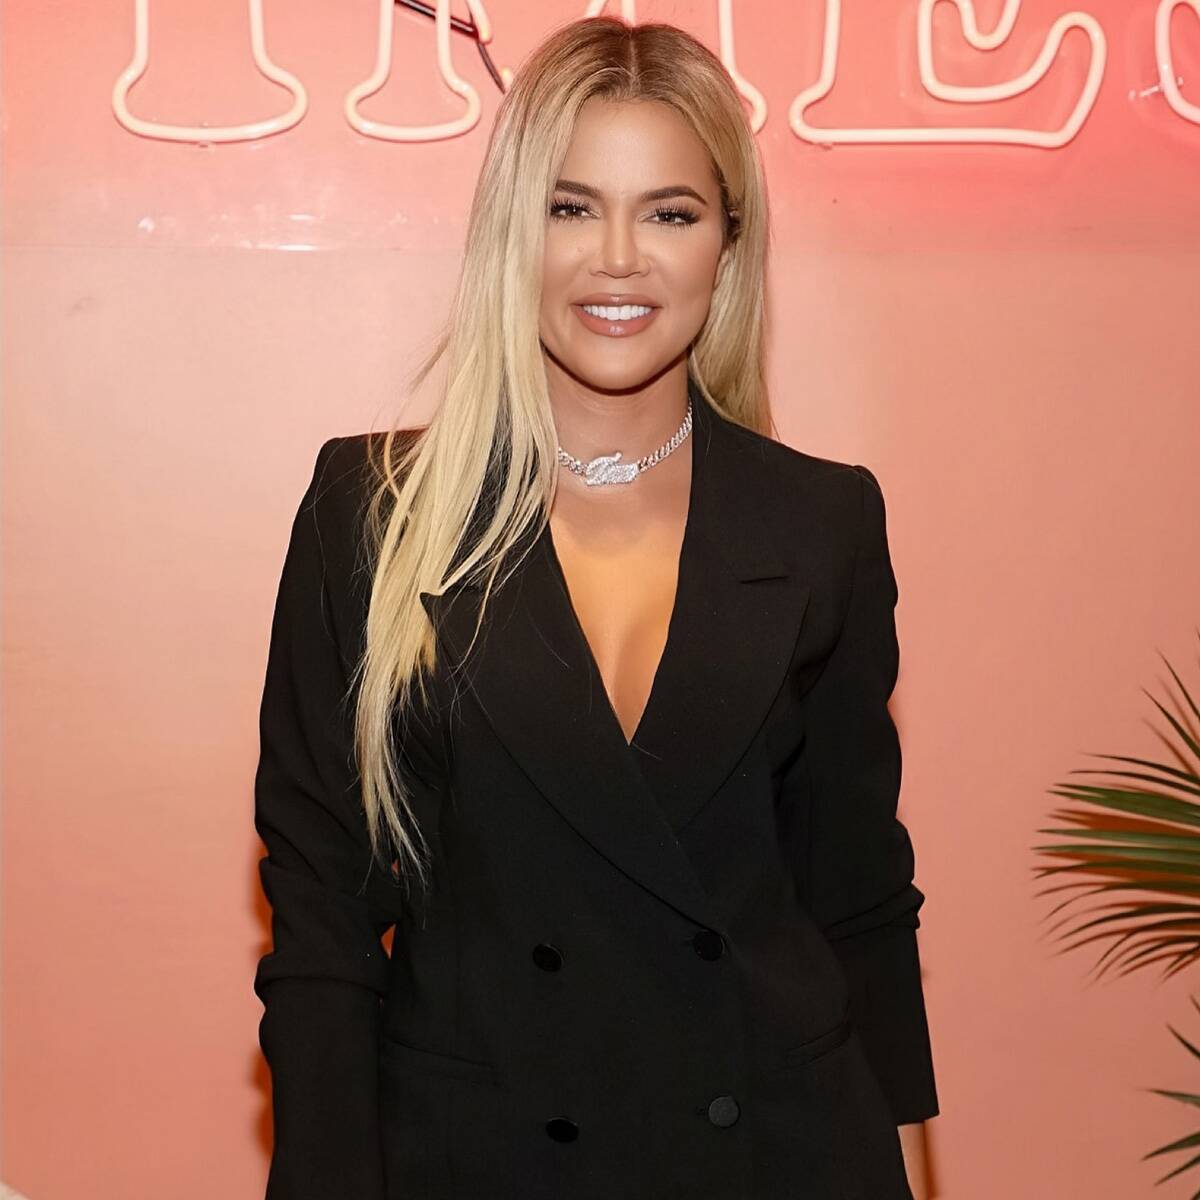 Khloe Kardashian Finally Shares a Close-Up of That Diamond Ring She's Been Rocking